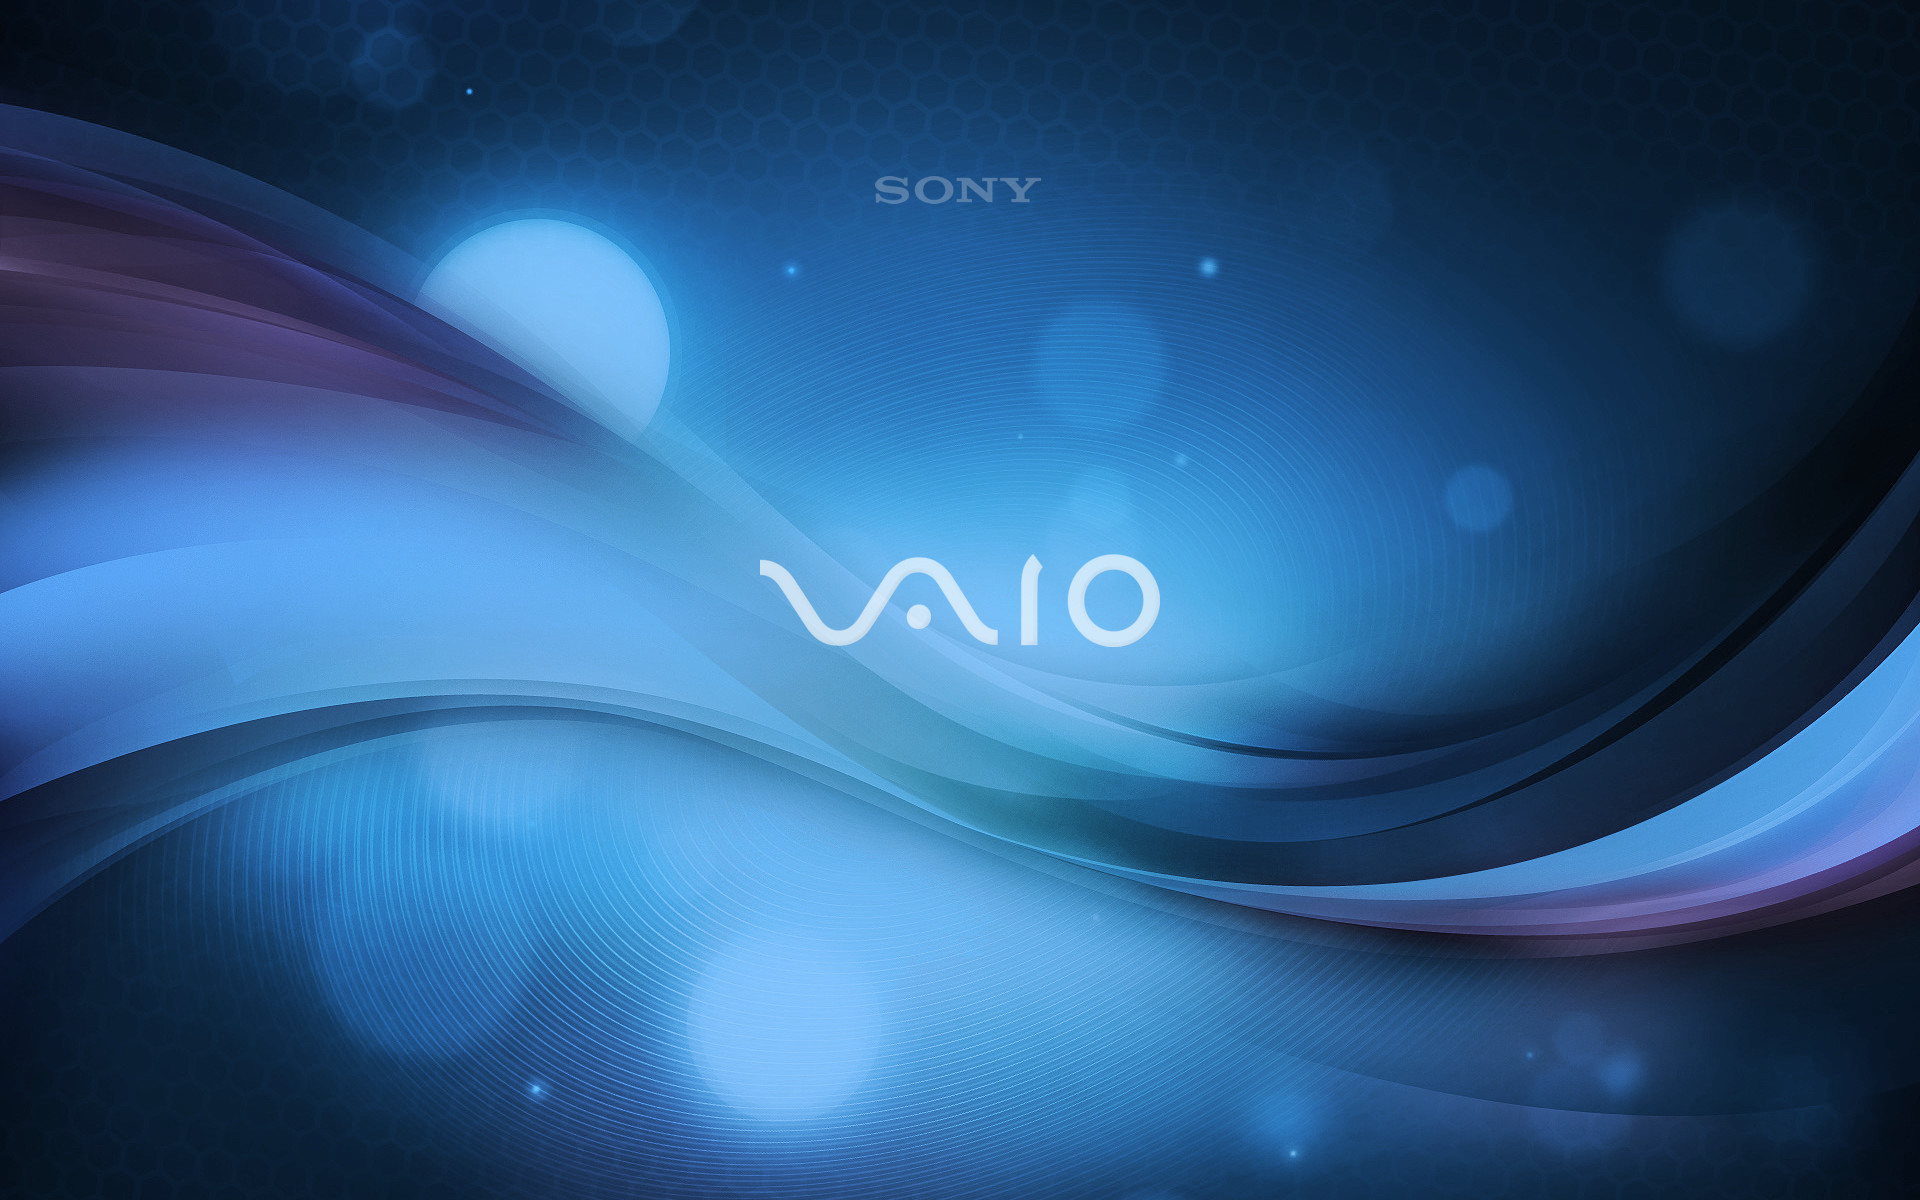 1920x1200 Sony Style Wallpaper Sony Vaio Computers Wallpapers in jpg format